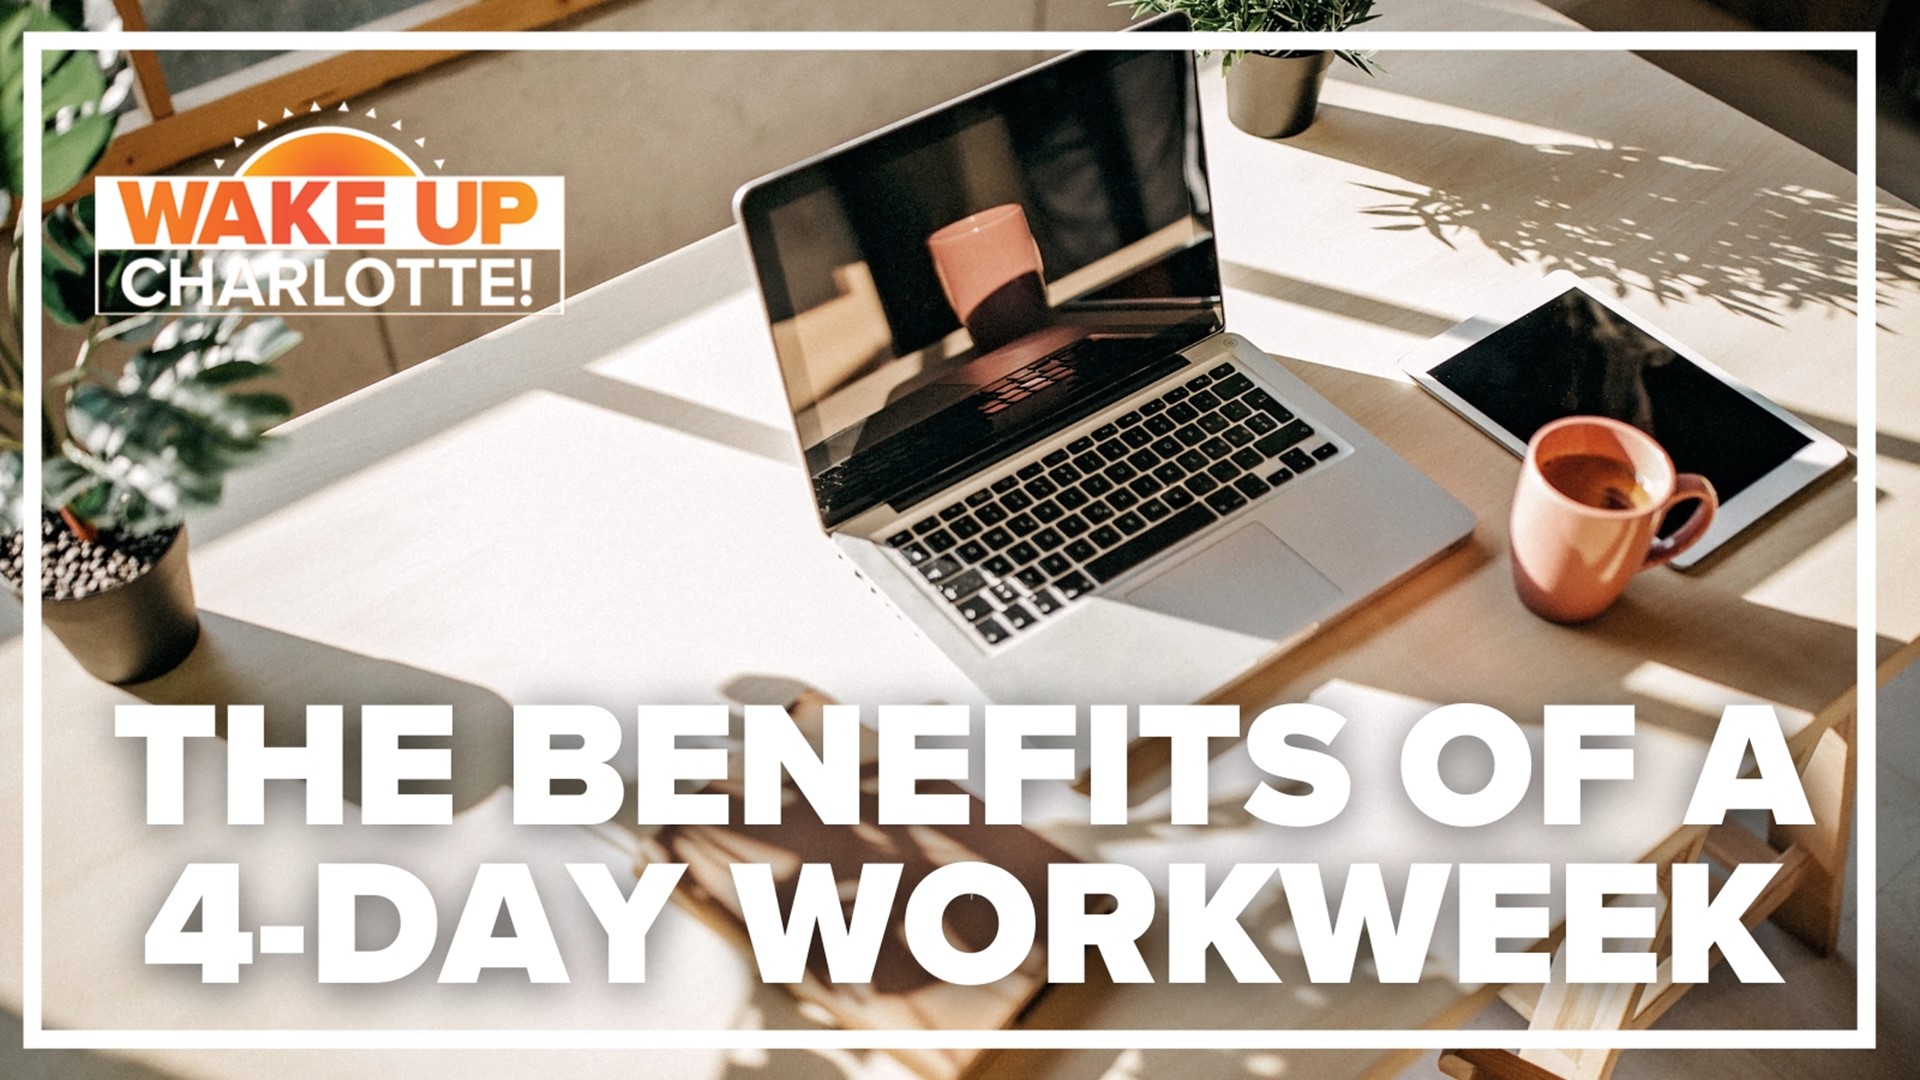 Breaking down the benefits of a 4-day work week.